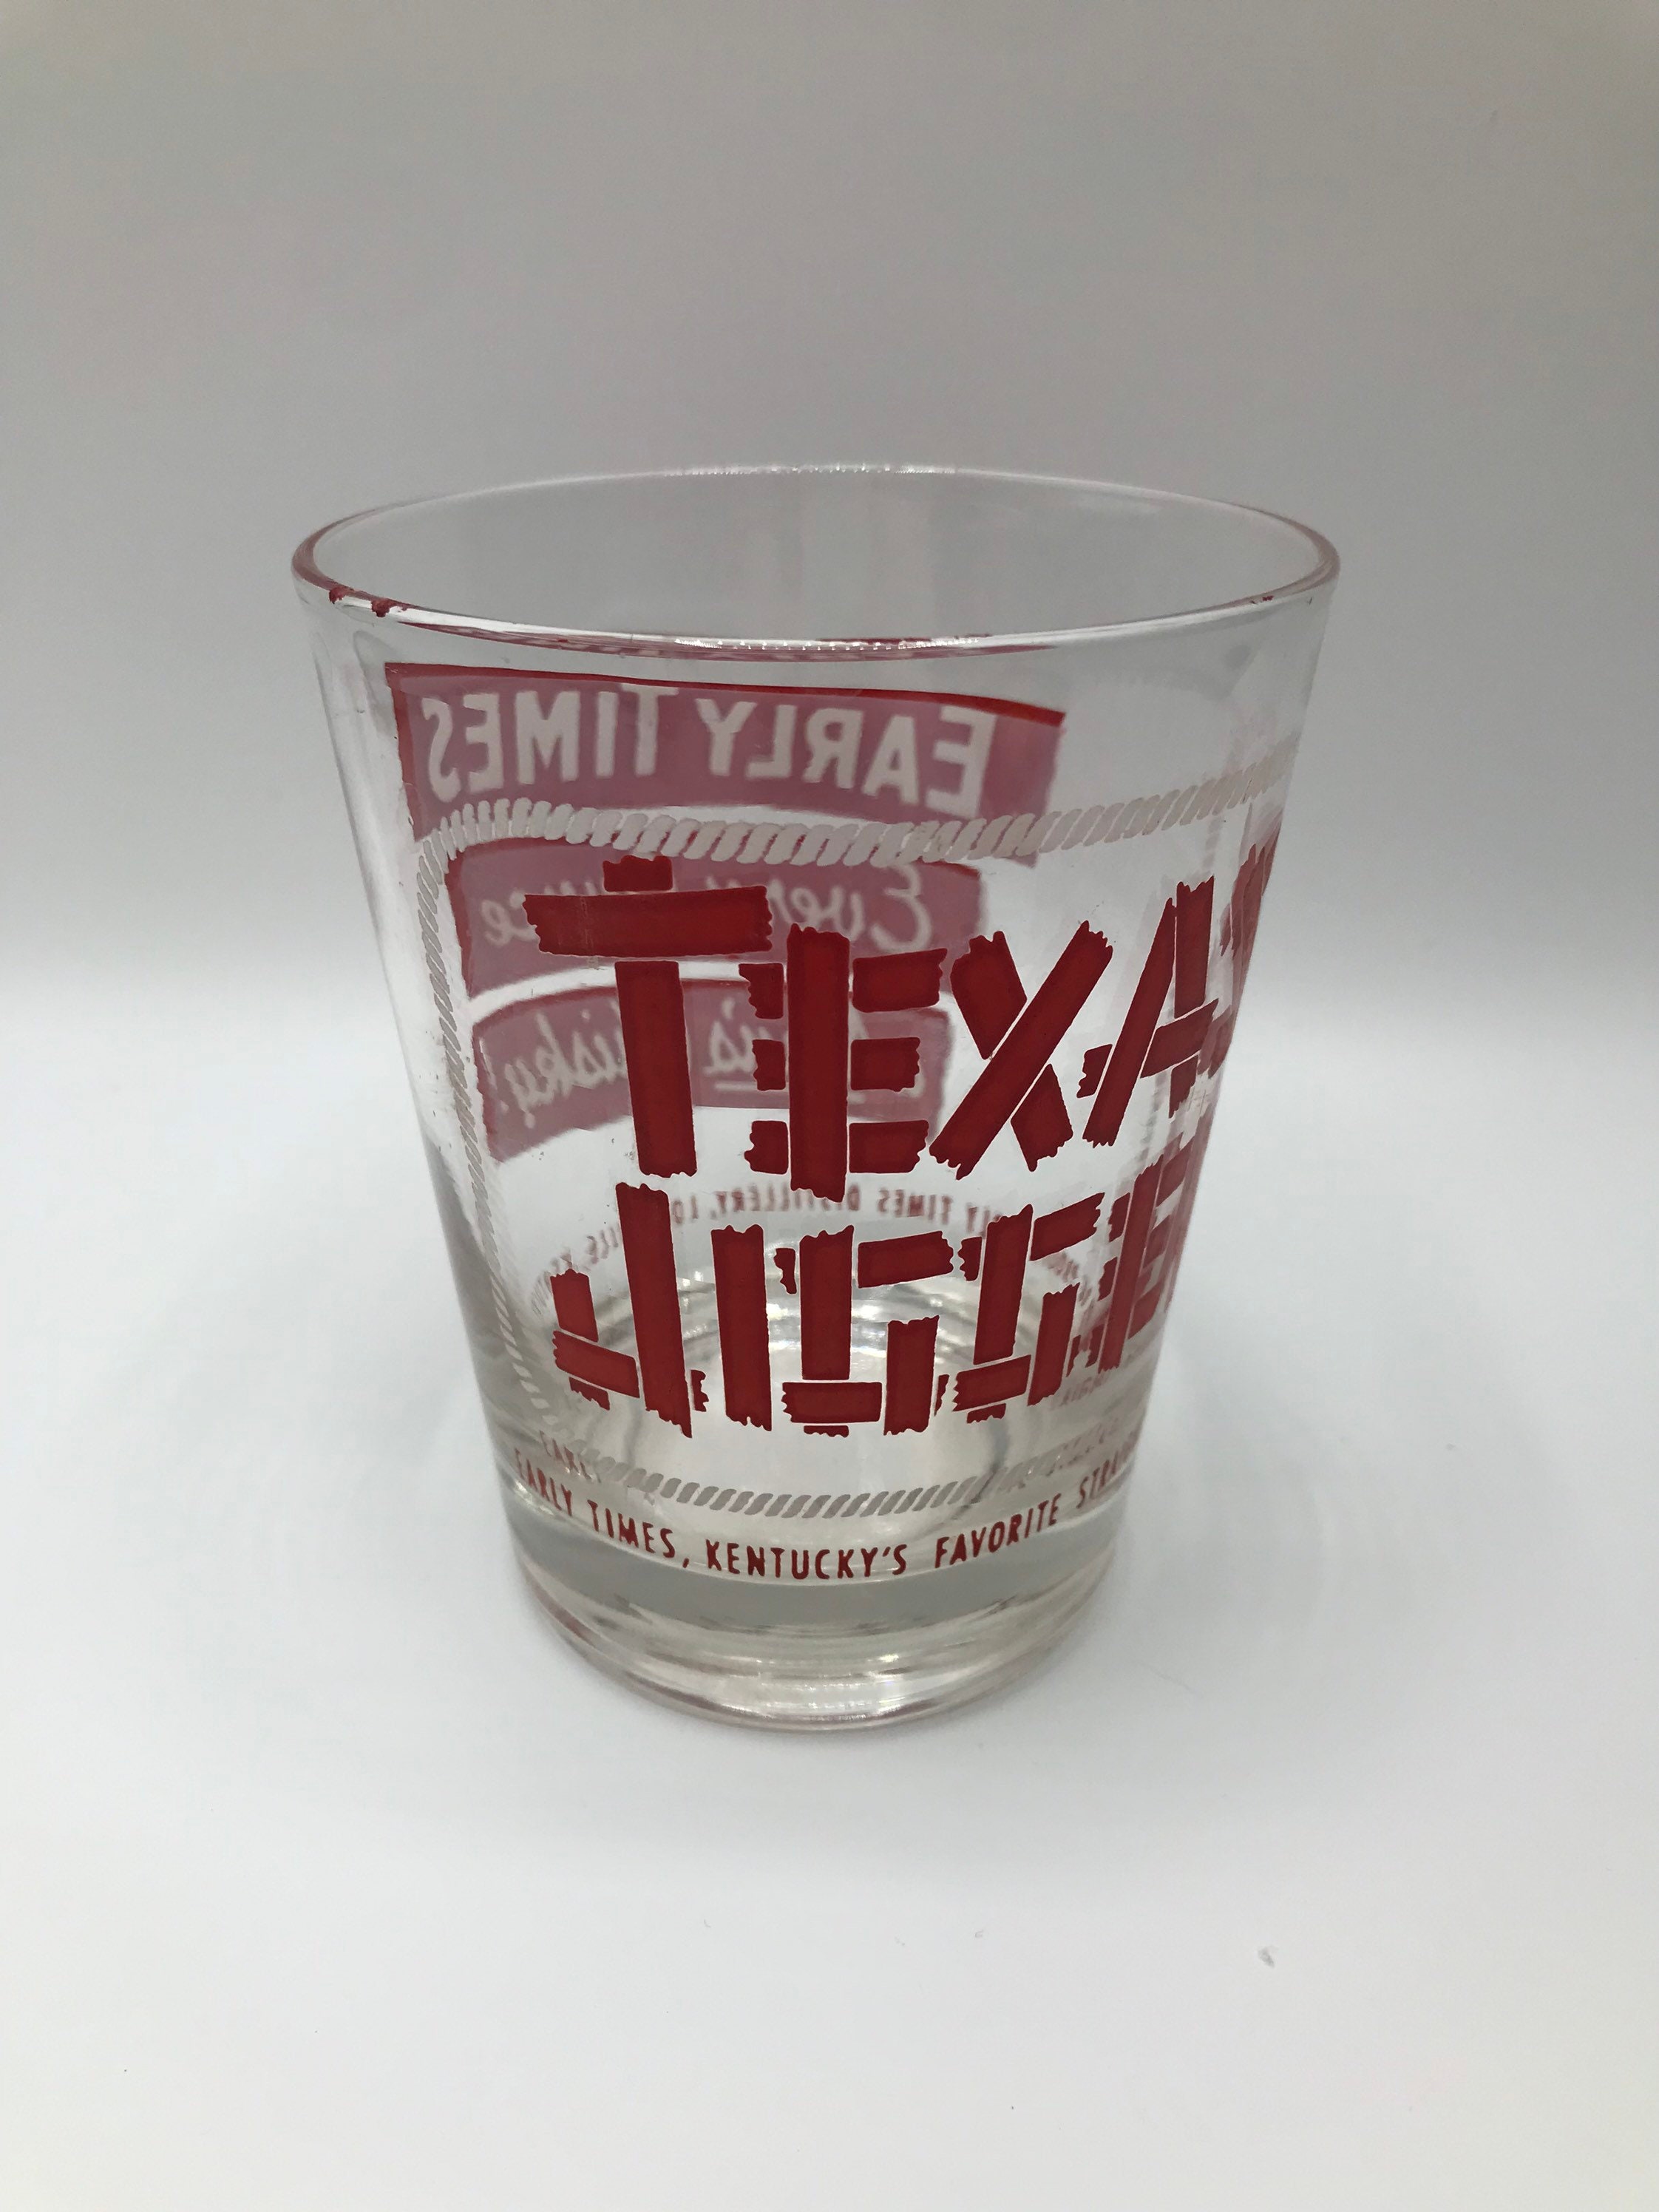 Vintage Texas Jigger Novelty Shot Glass Early Times Whiskey 